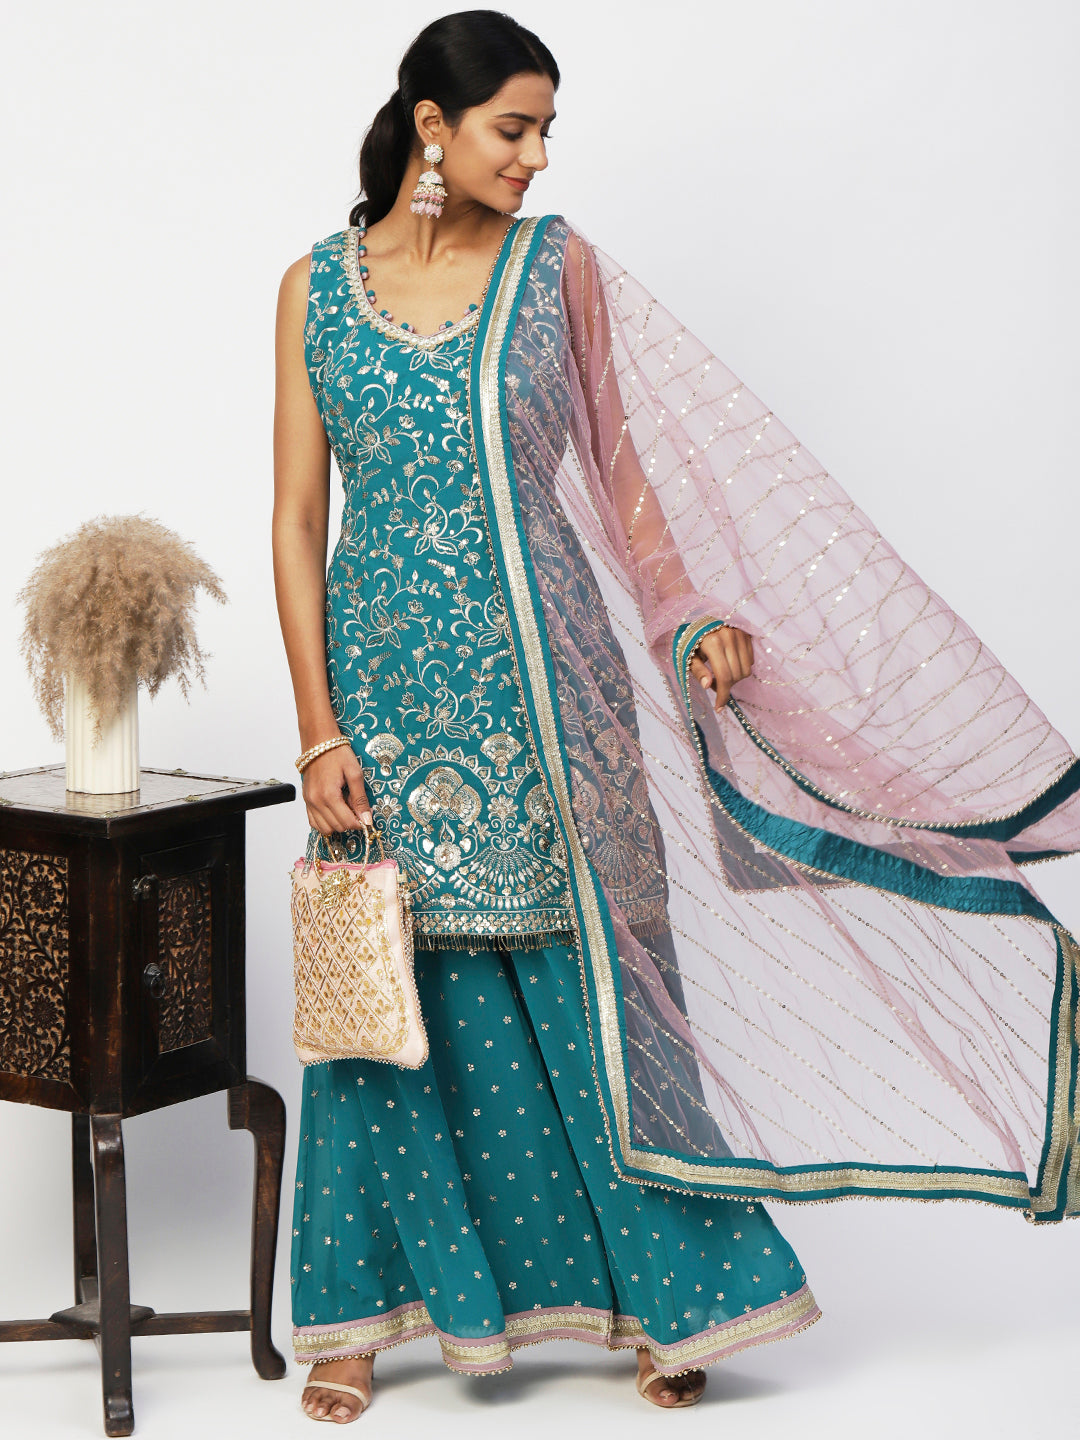 Blue Georgette Turquoise Sharara Set with Gold Embroidery - PepaBai